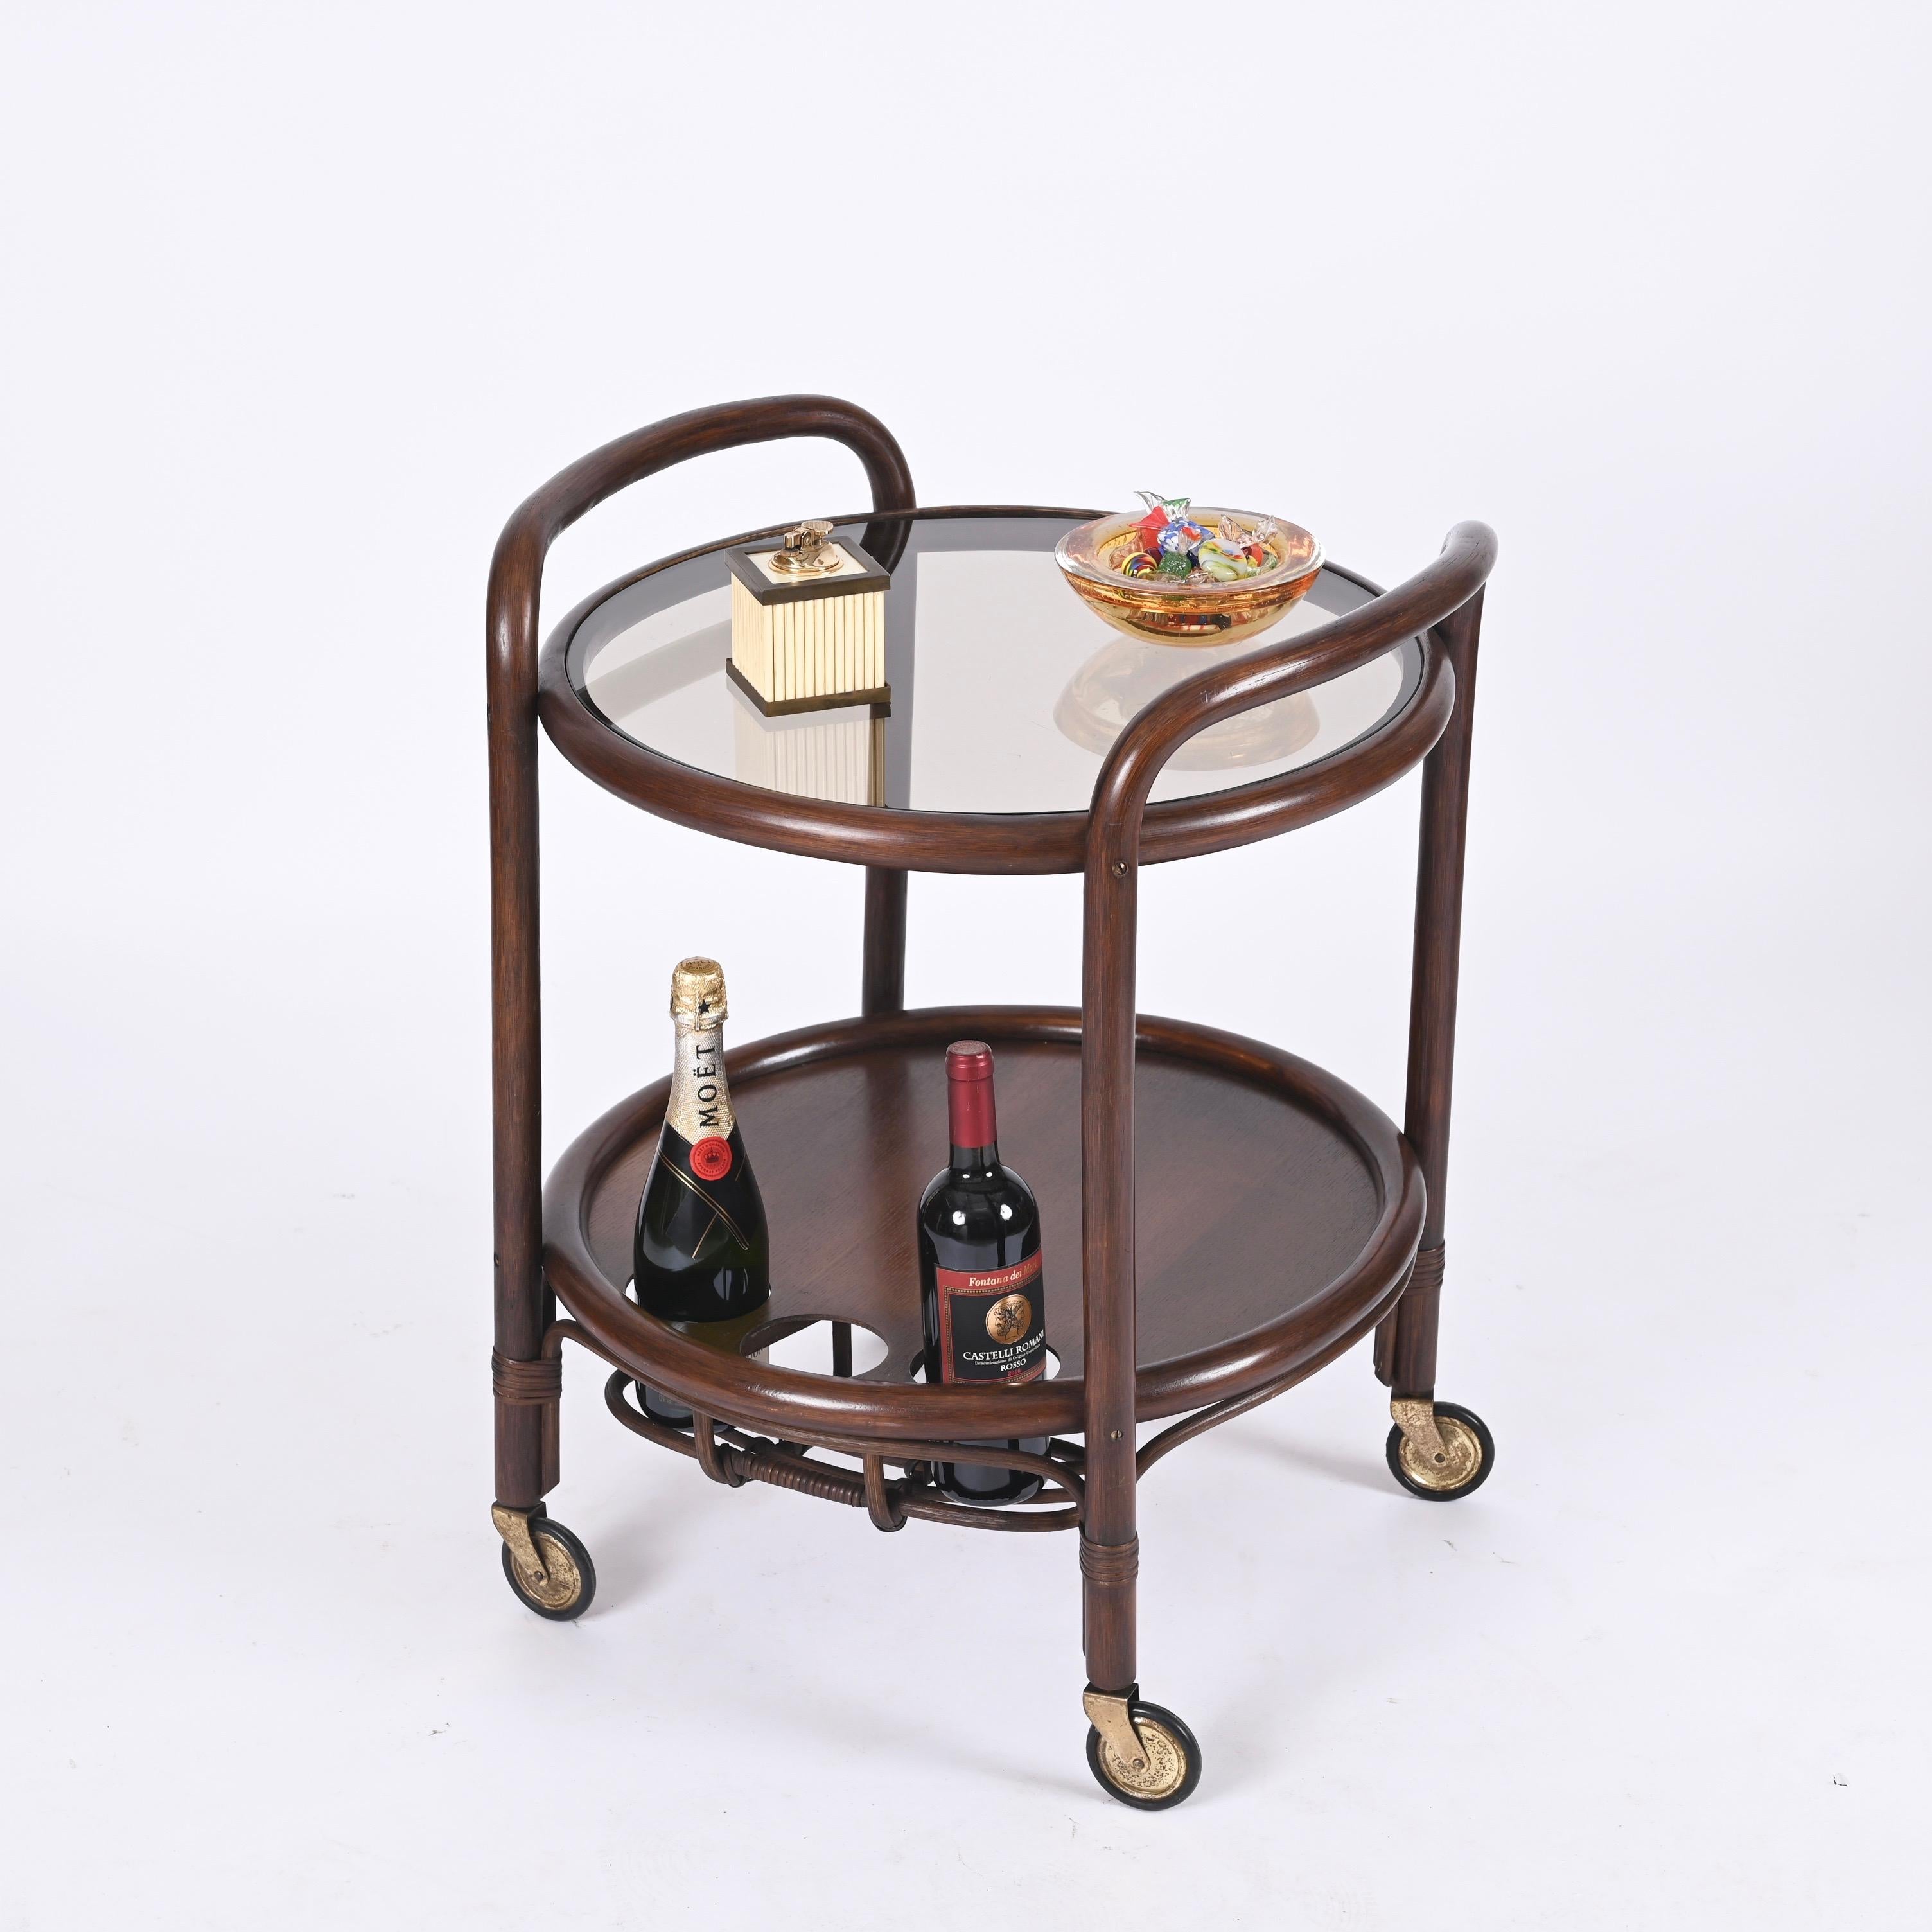 Midcentury Bar Serving Cart in Bamboo, Rattan and Smoked Glass, Italy, 1970s For Sale 8